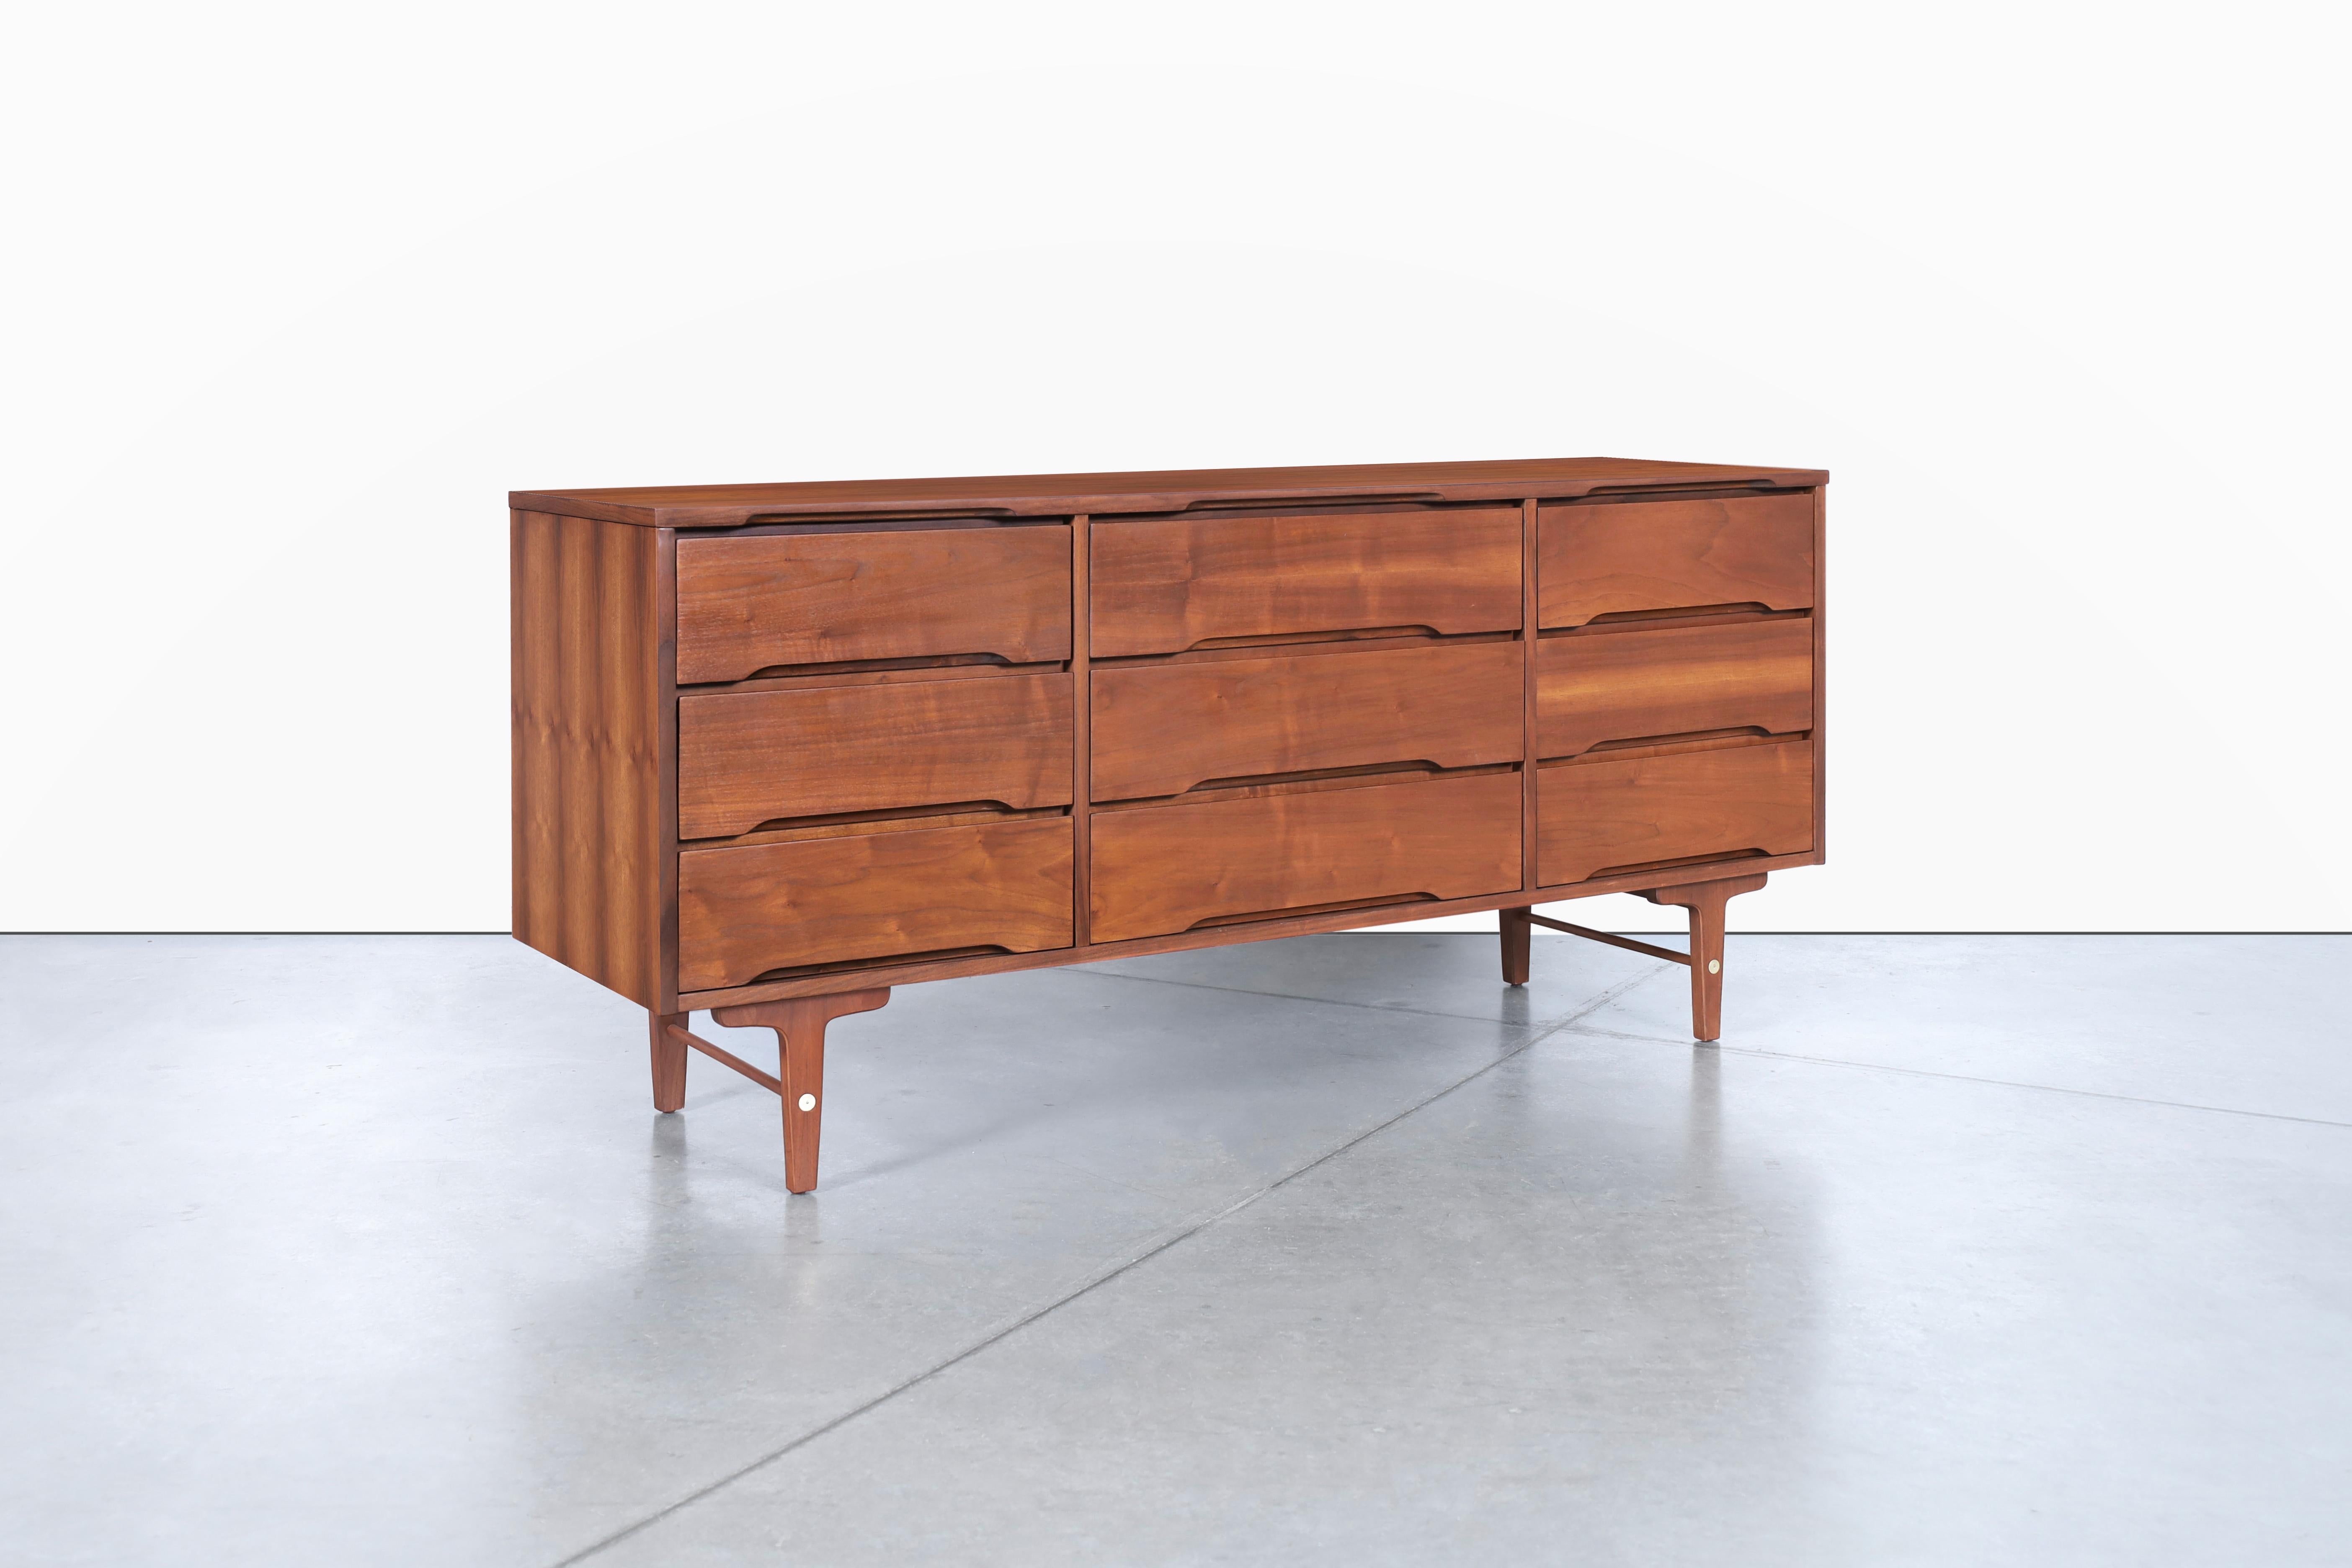 This stunning mid-century modern walnut dresser from Stanley Furniture is a true masterpiece of design and craftsmanship. Dating back to the 1950s, it boasts high-quality walnut construction and features nine dovetail drawers that offer ample